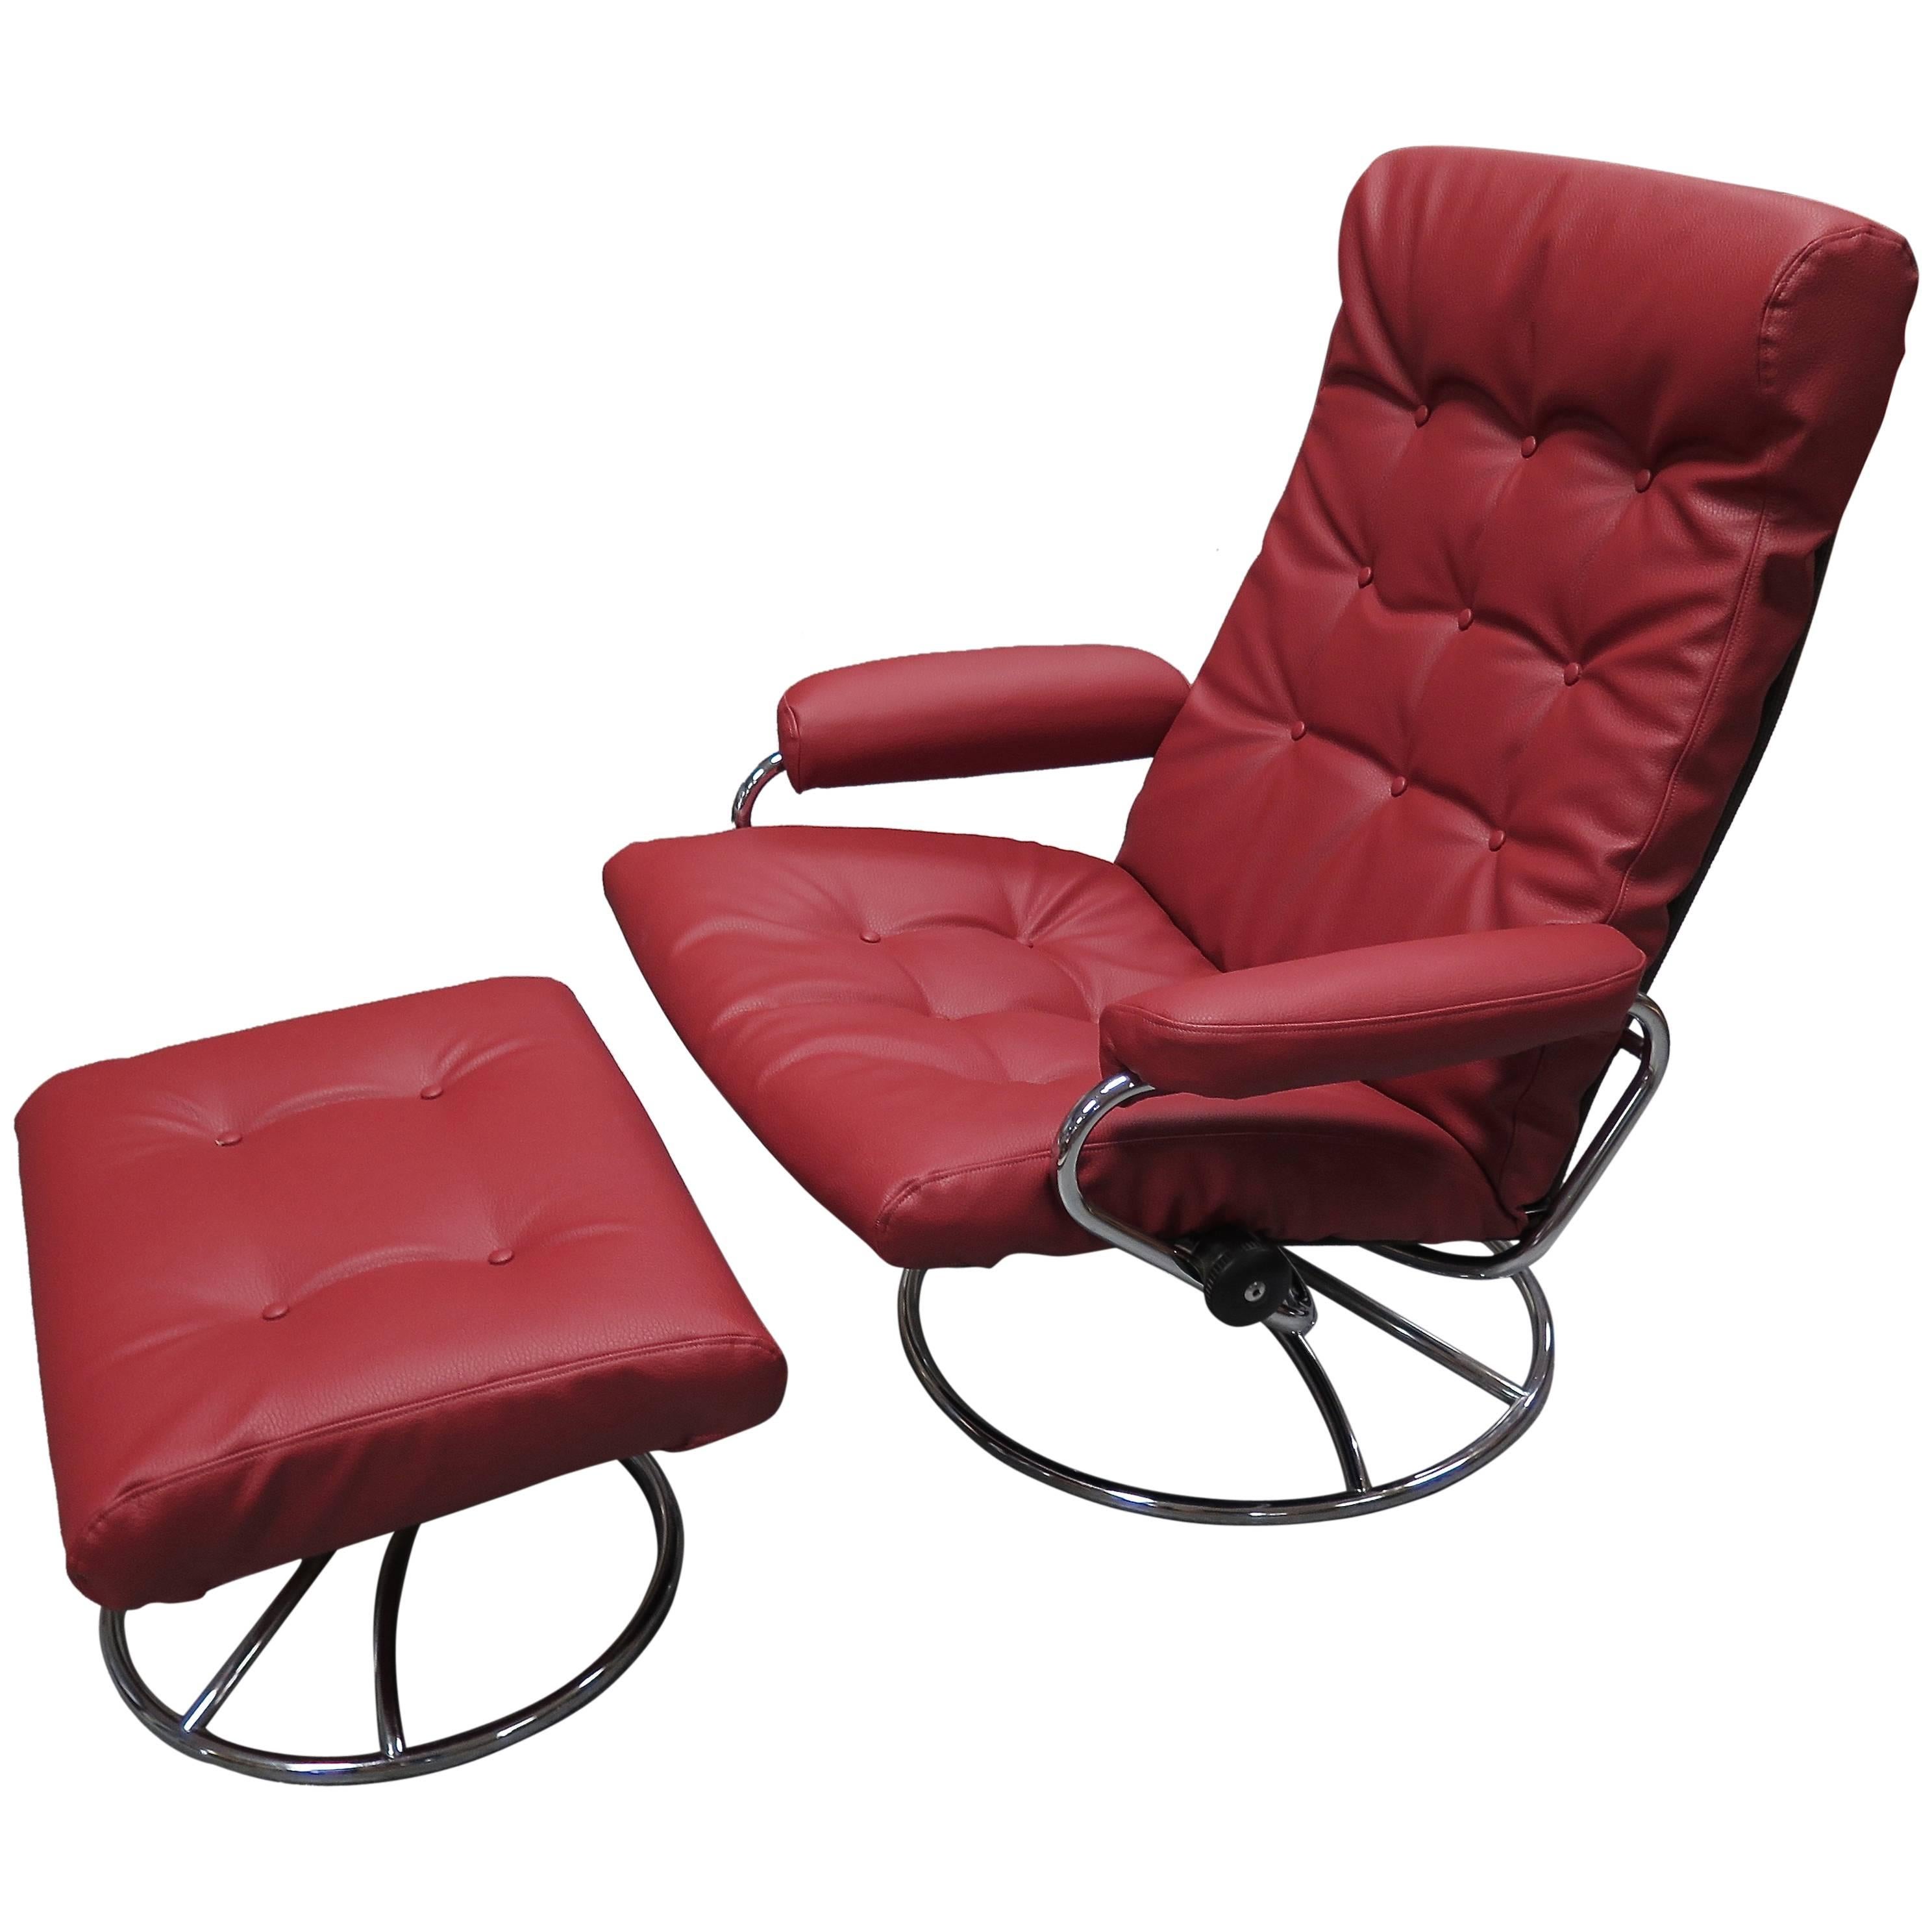 Comfortable 1960 Ekornes Stressless Lounge with Ottoman